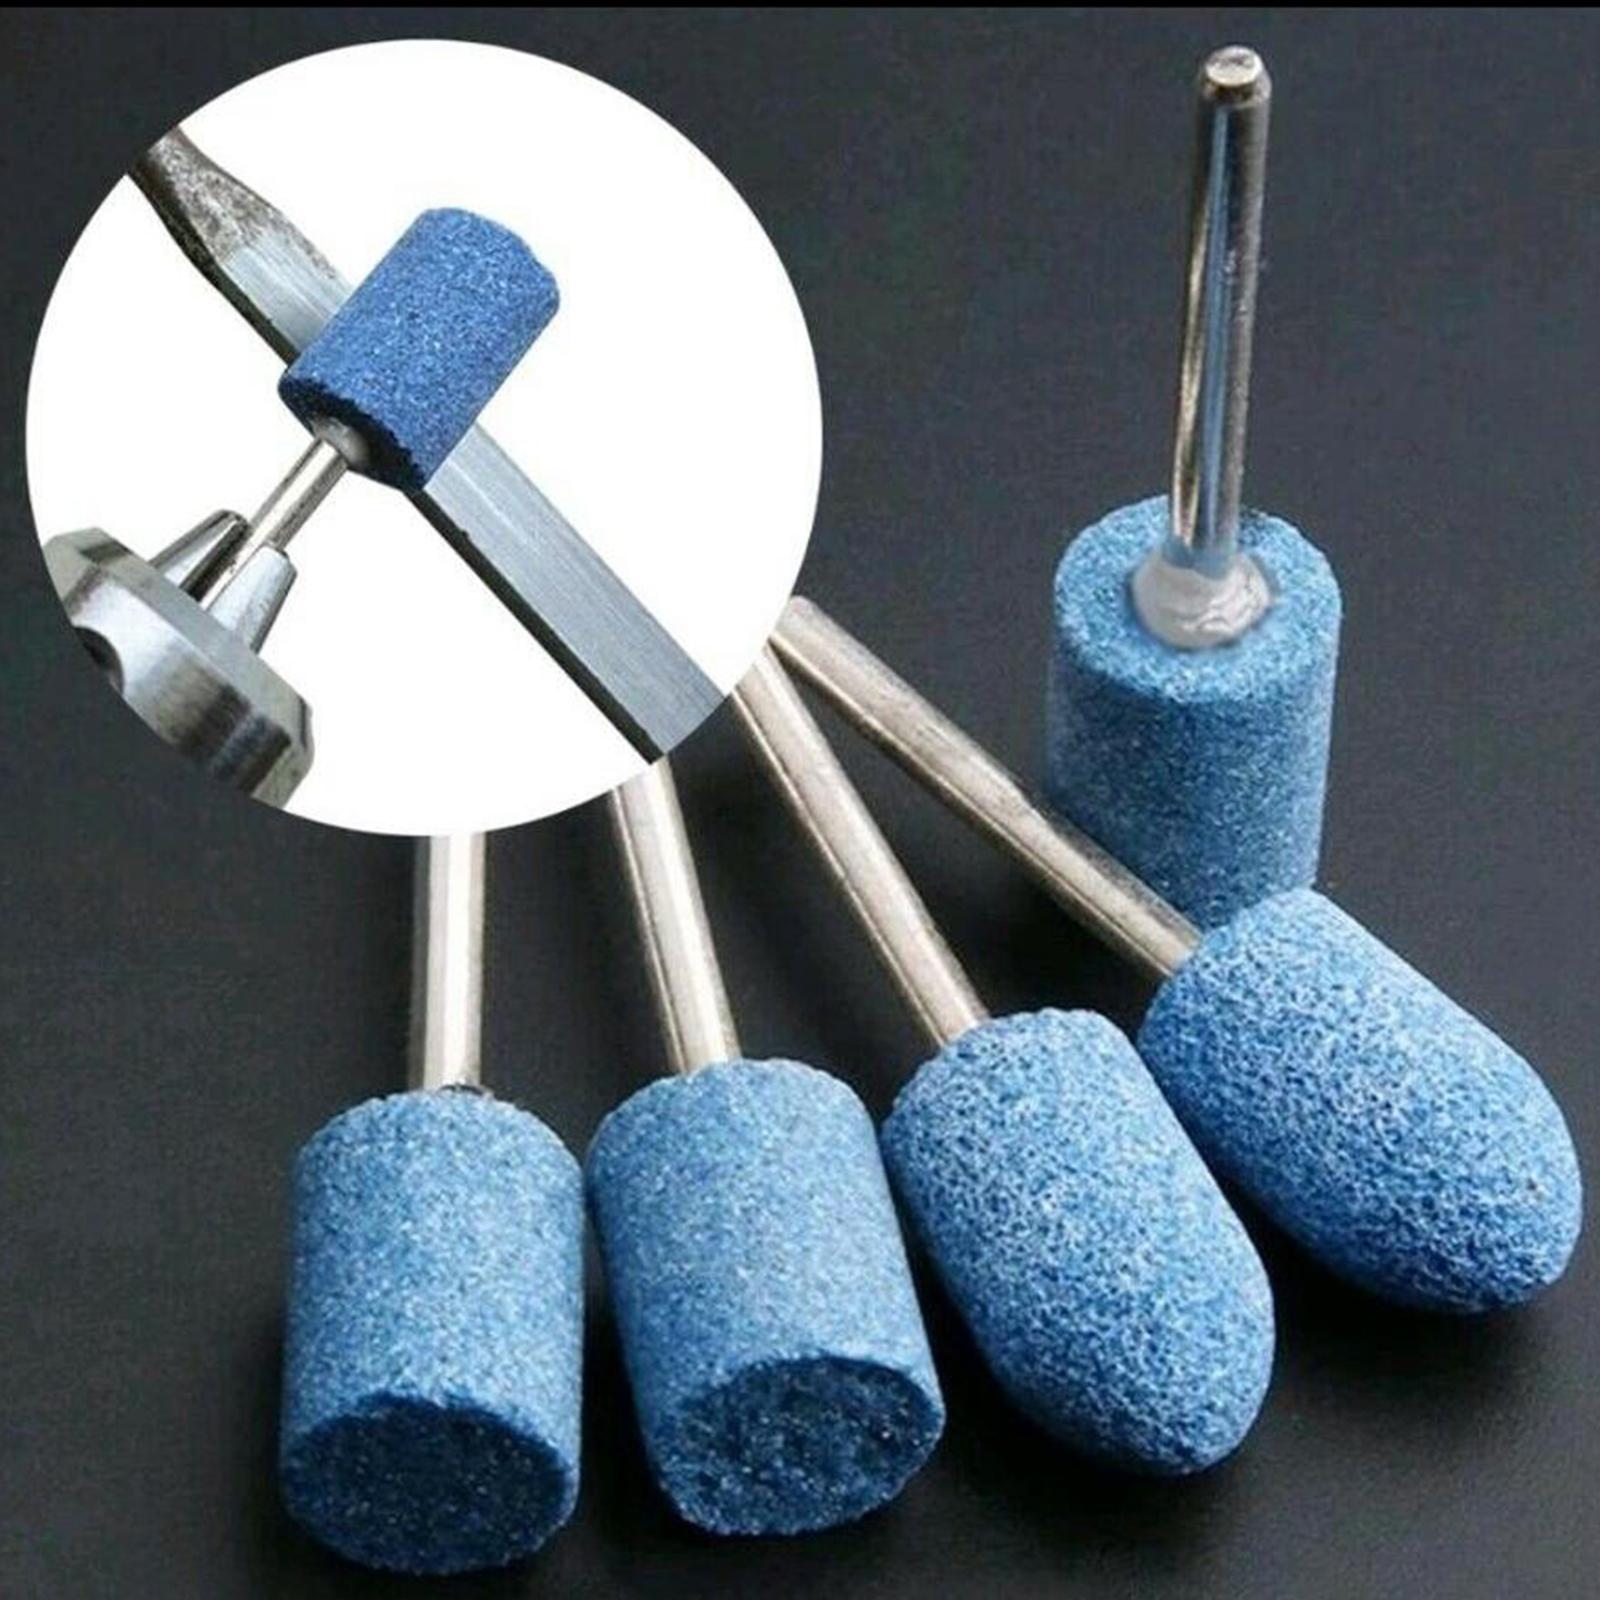 10x Cutting Burrs Rotary Files Bits for Die Grinder Metal Woodworking